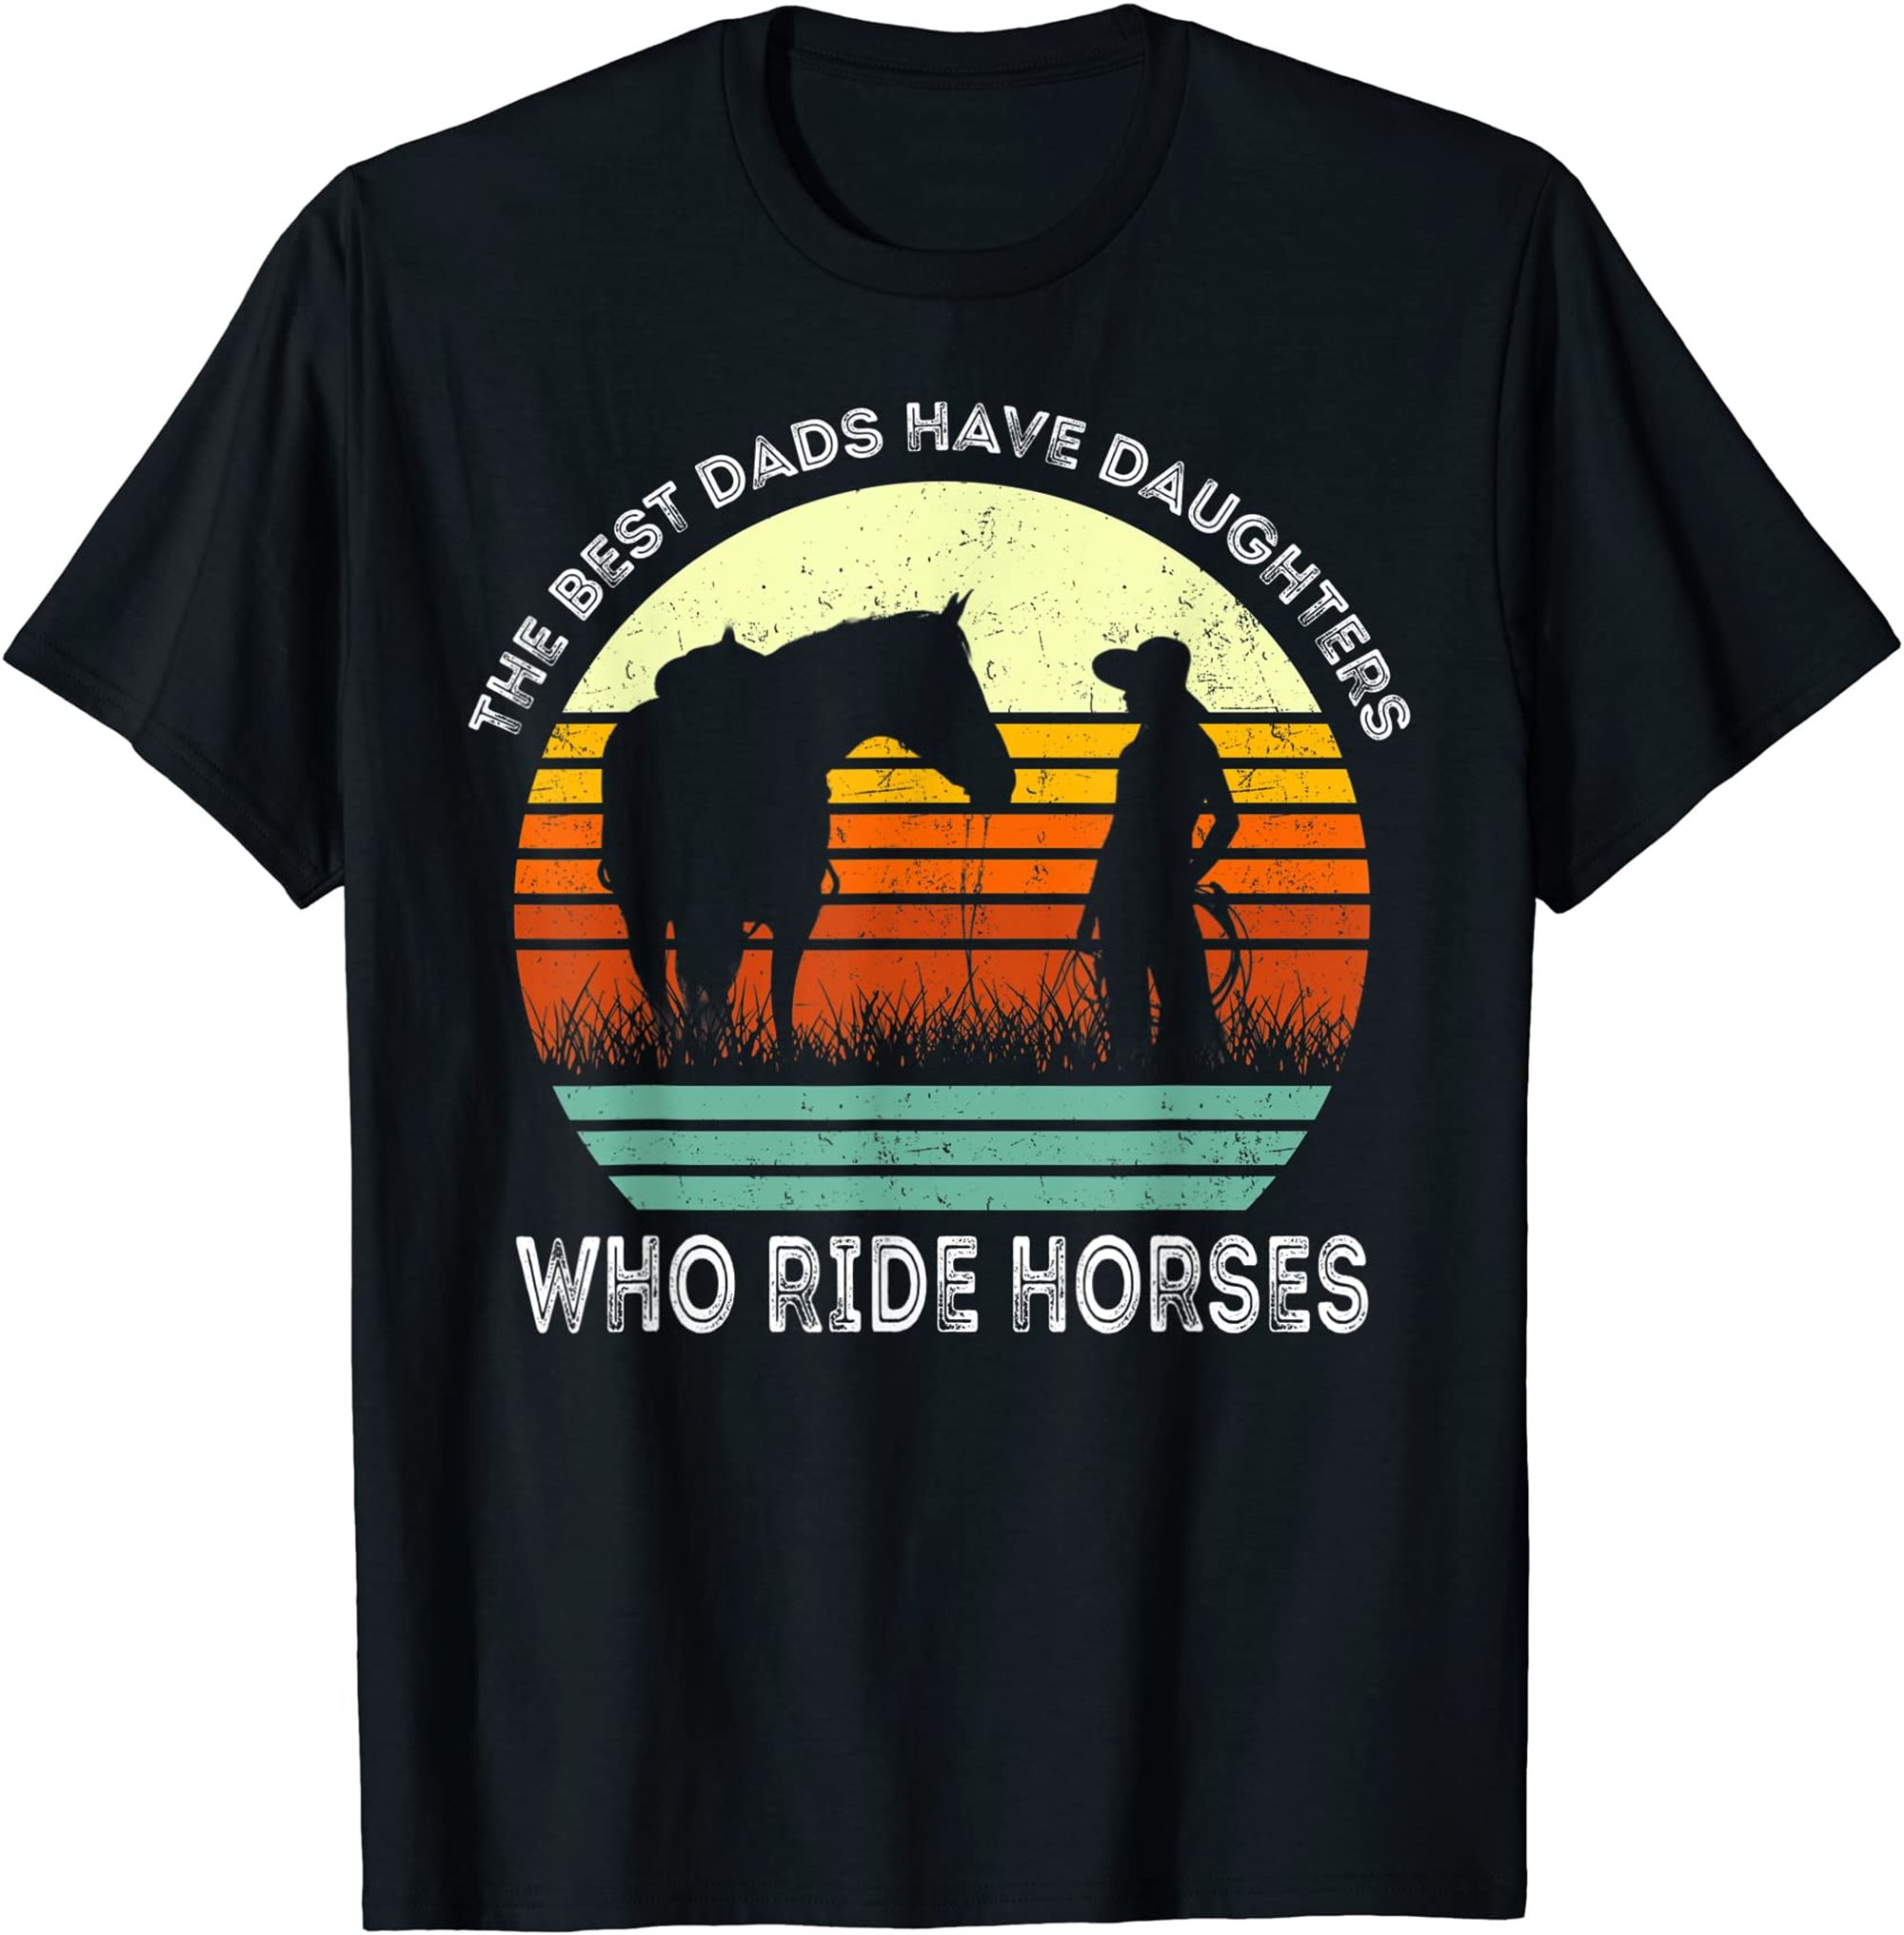 Vintage The Best Dads Have Daughters Who Ride Horses T-shirt Full Size Up To 5xl